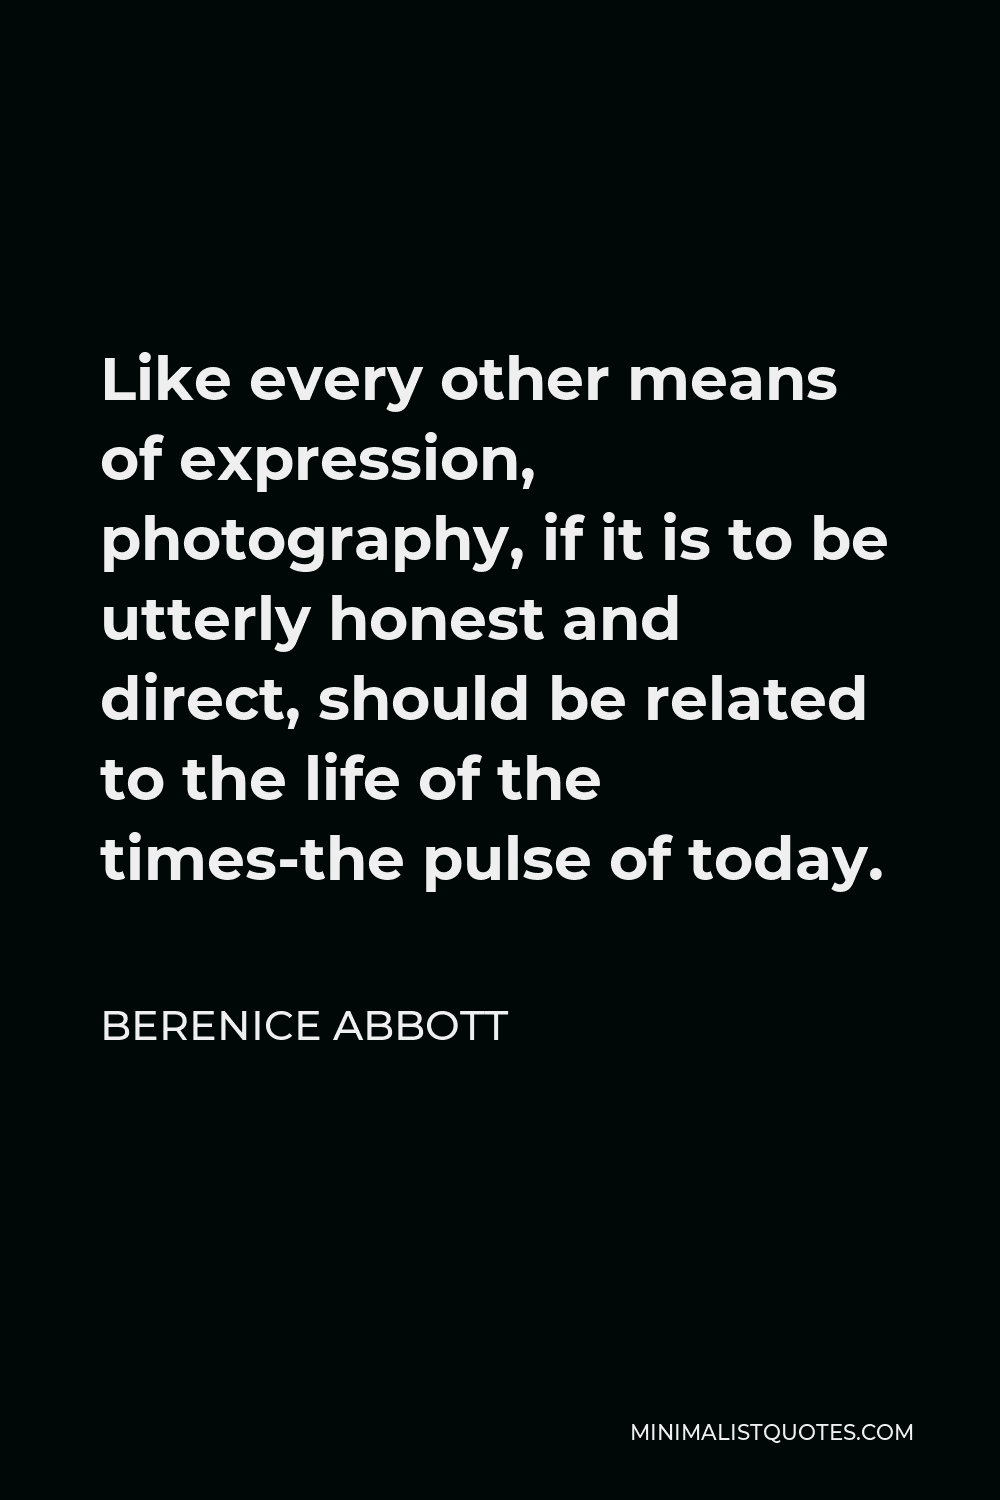 Berenice Abbott Quote - Like every other means of expression, photography, if it is to be utterly honest and direct, should be related to the life of the times – the pulse of today.